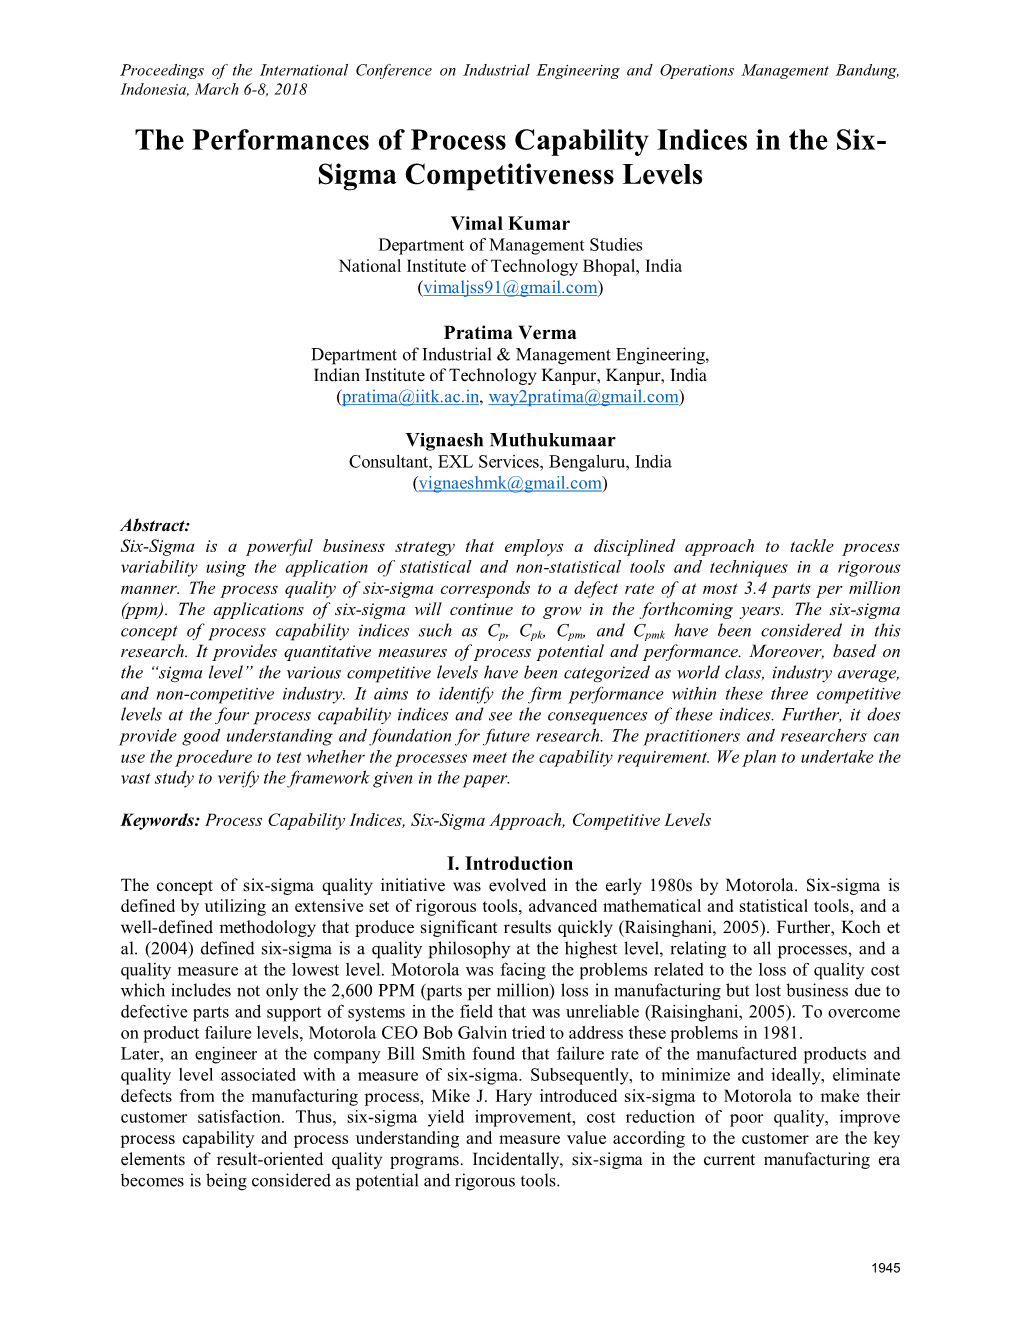 ID 524 the Performances of Process Capability Indices in the Six-Sigma